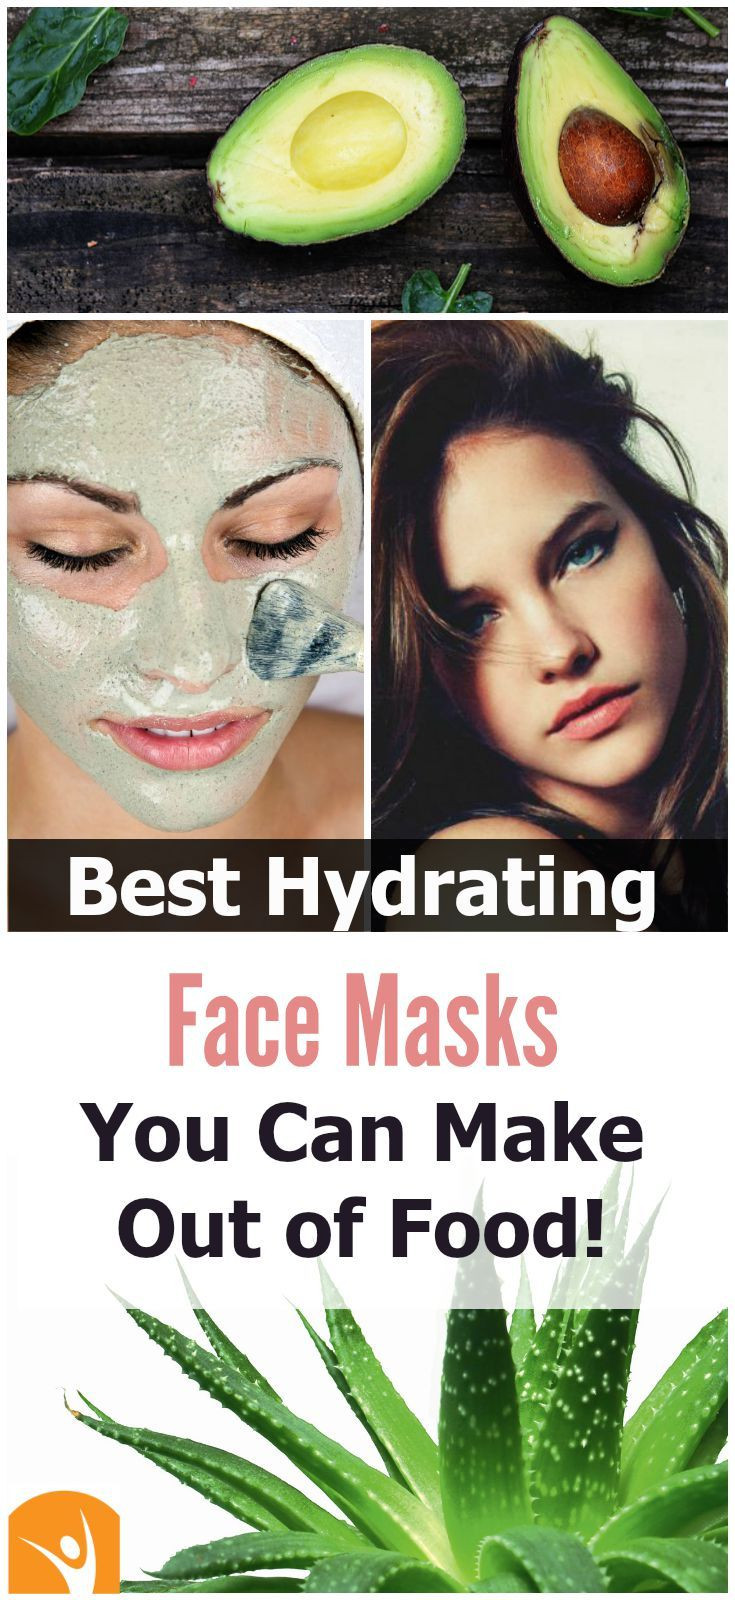 Hydrating Facial Mask DIY
 Best Hydrating Face Masks You Can Make out of Food